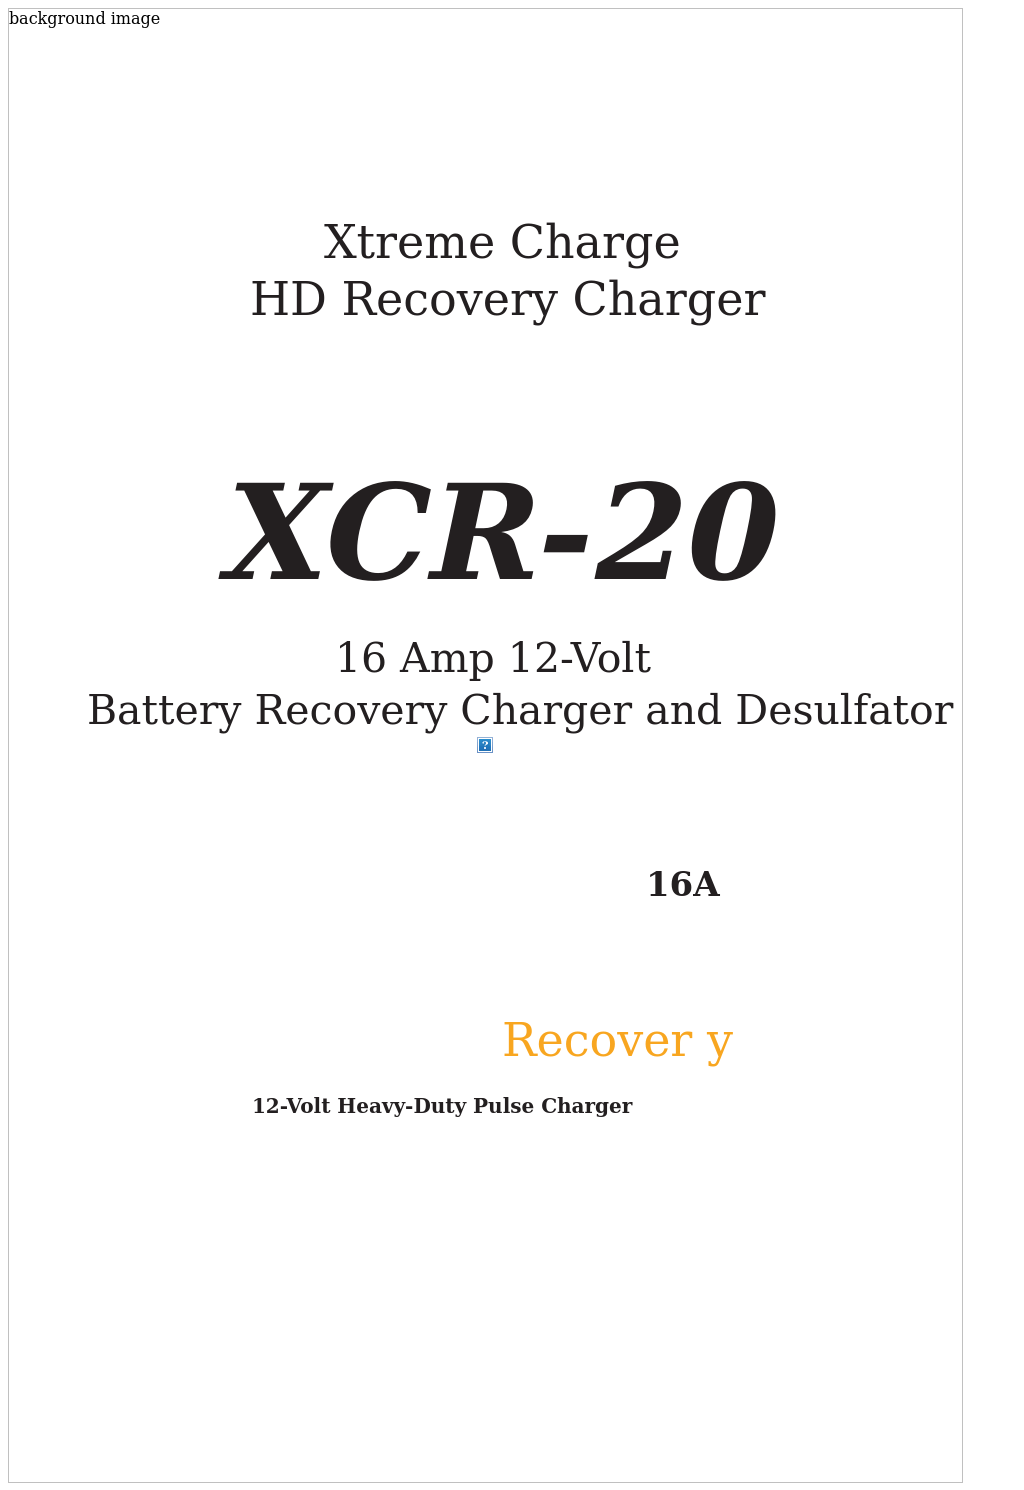 XCR-20 Battery Recovery Charger & Desulfator (100X500)